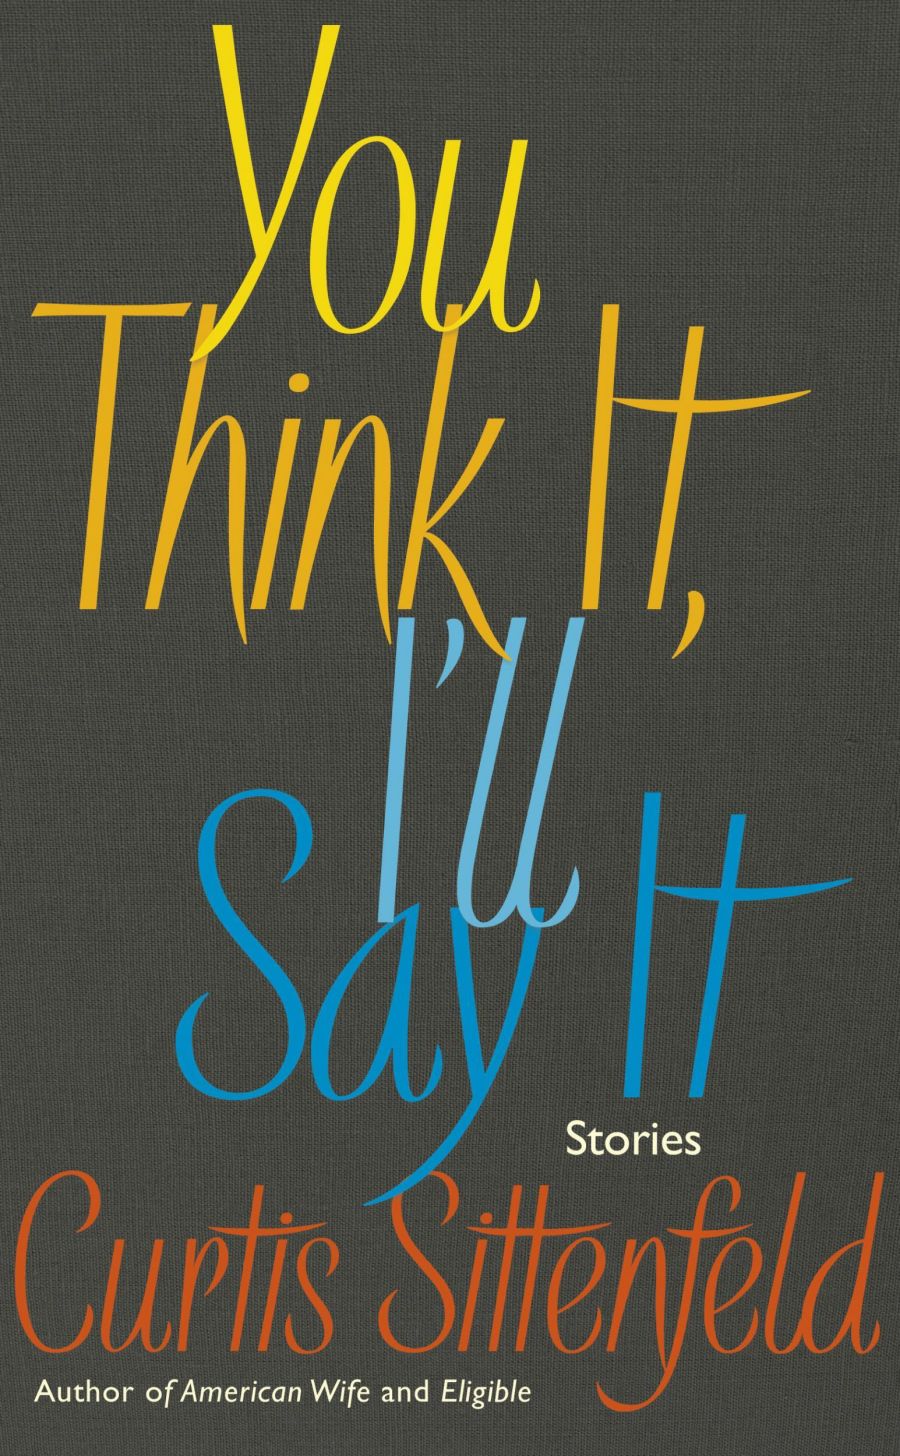 Book cover of You Think It, I'll Say It by Curtis Sittenfeld.